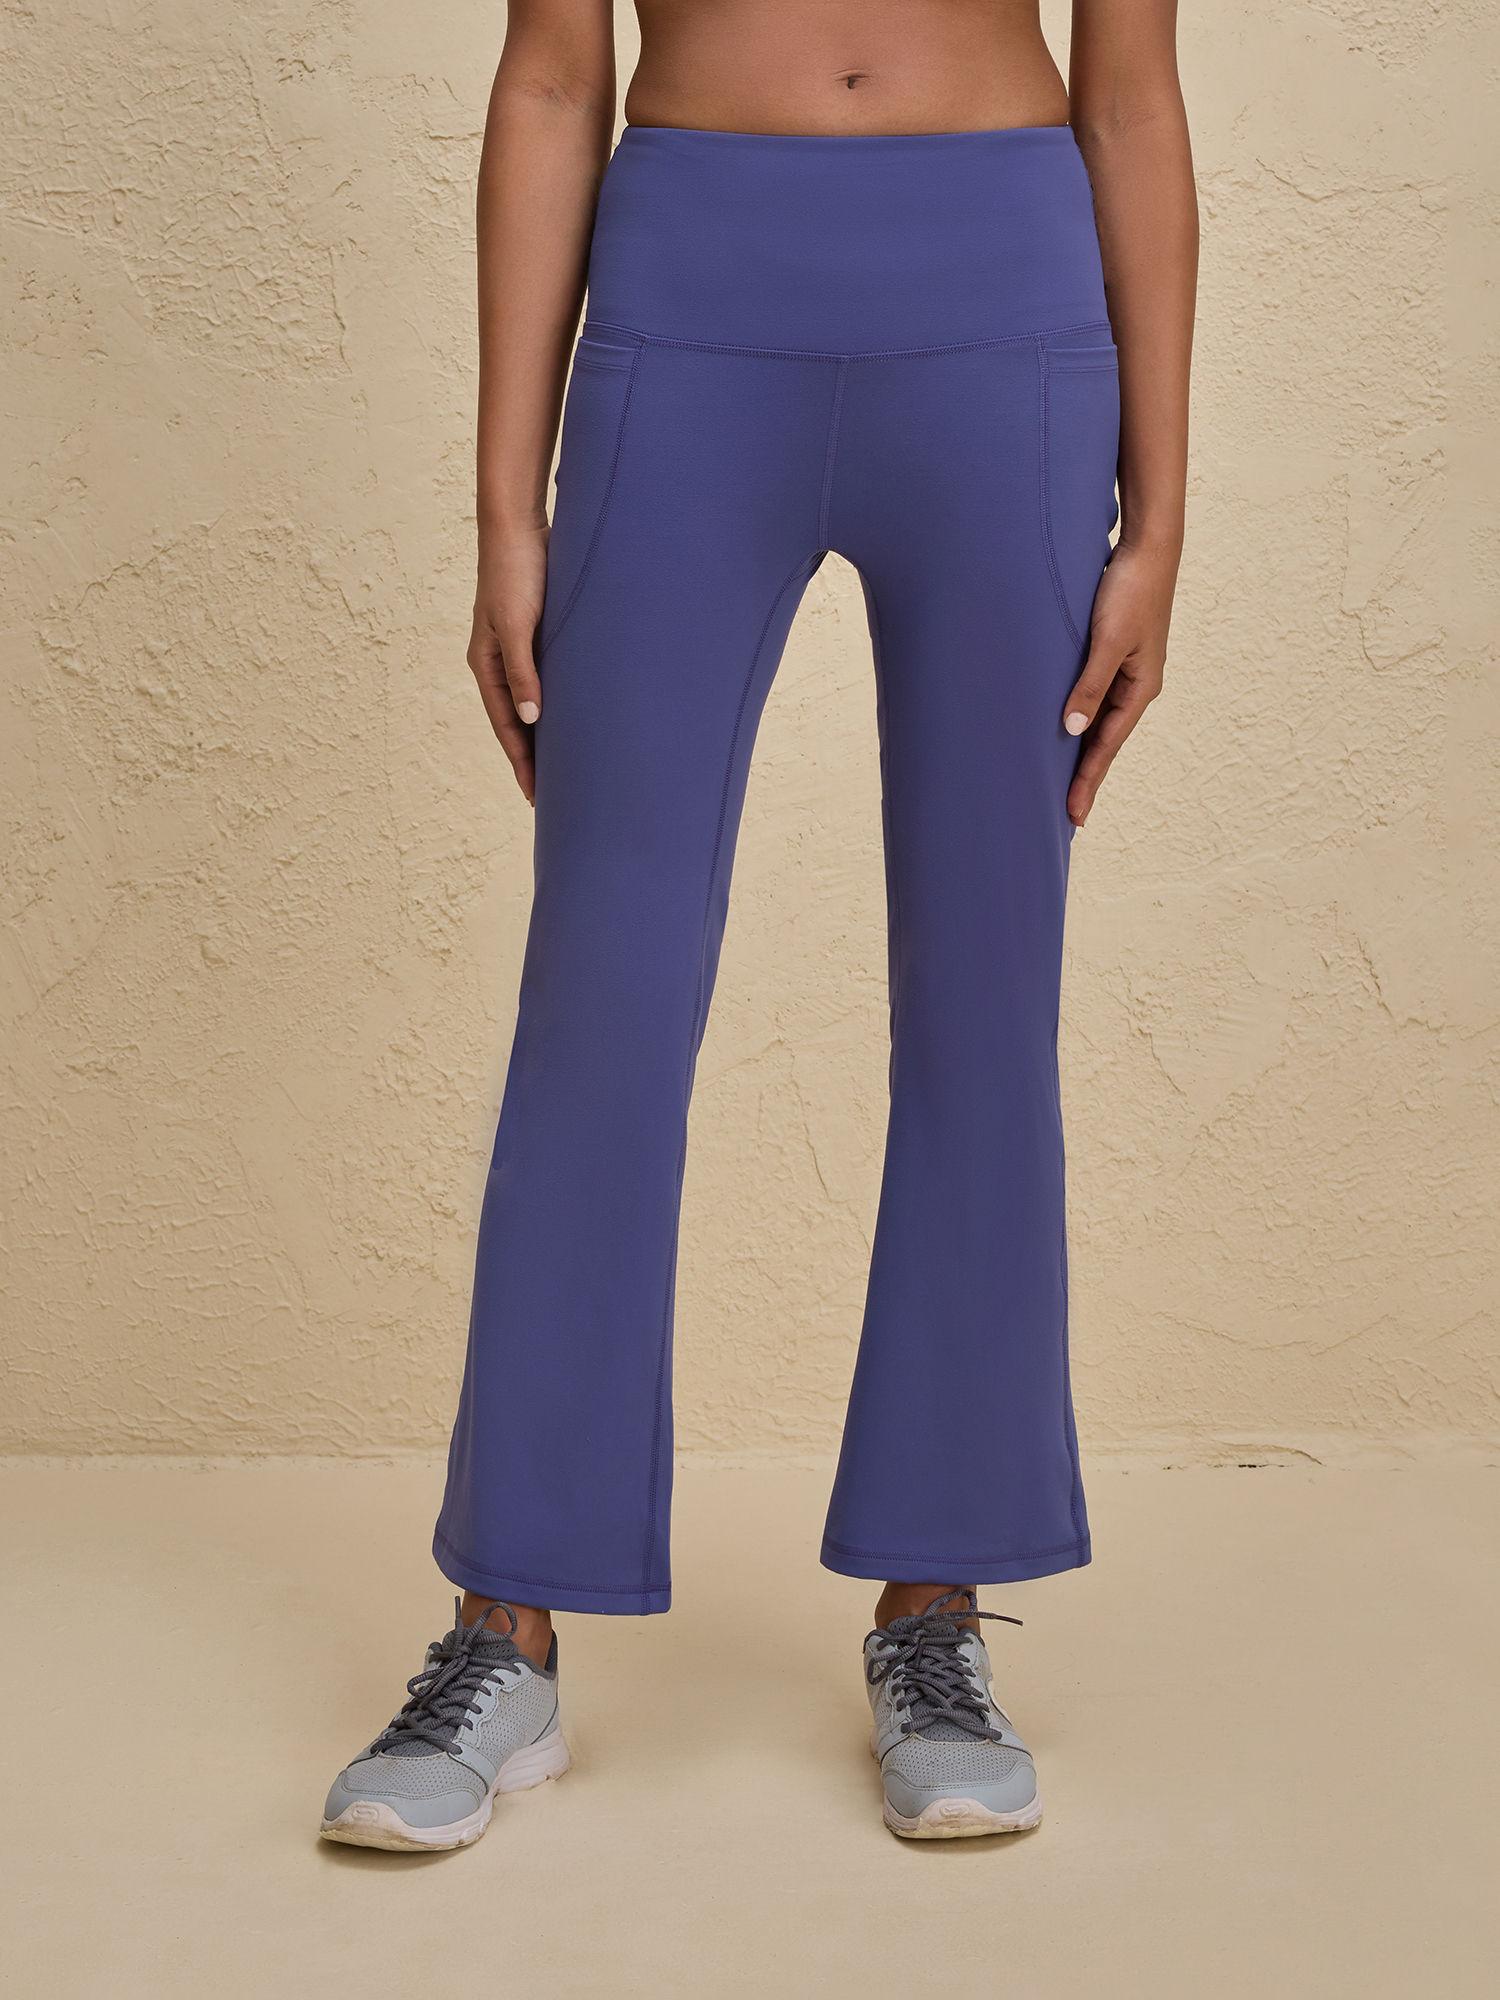 cloud soft super comfy & flattering flare pants with pockets-nyk252-blue